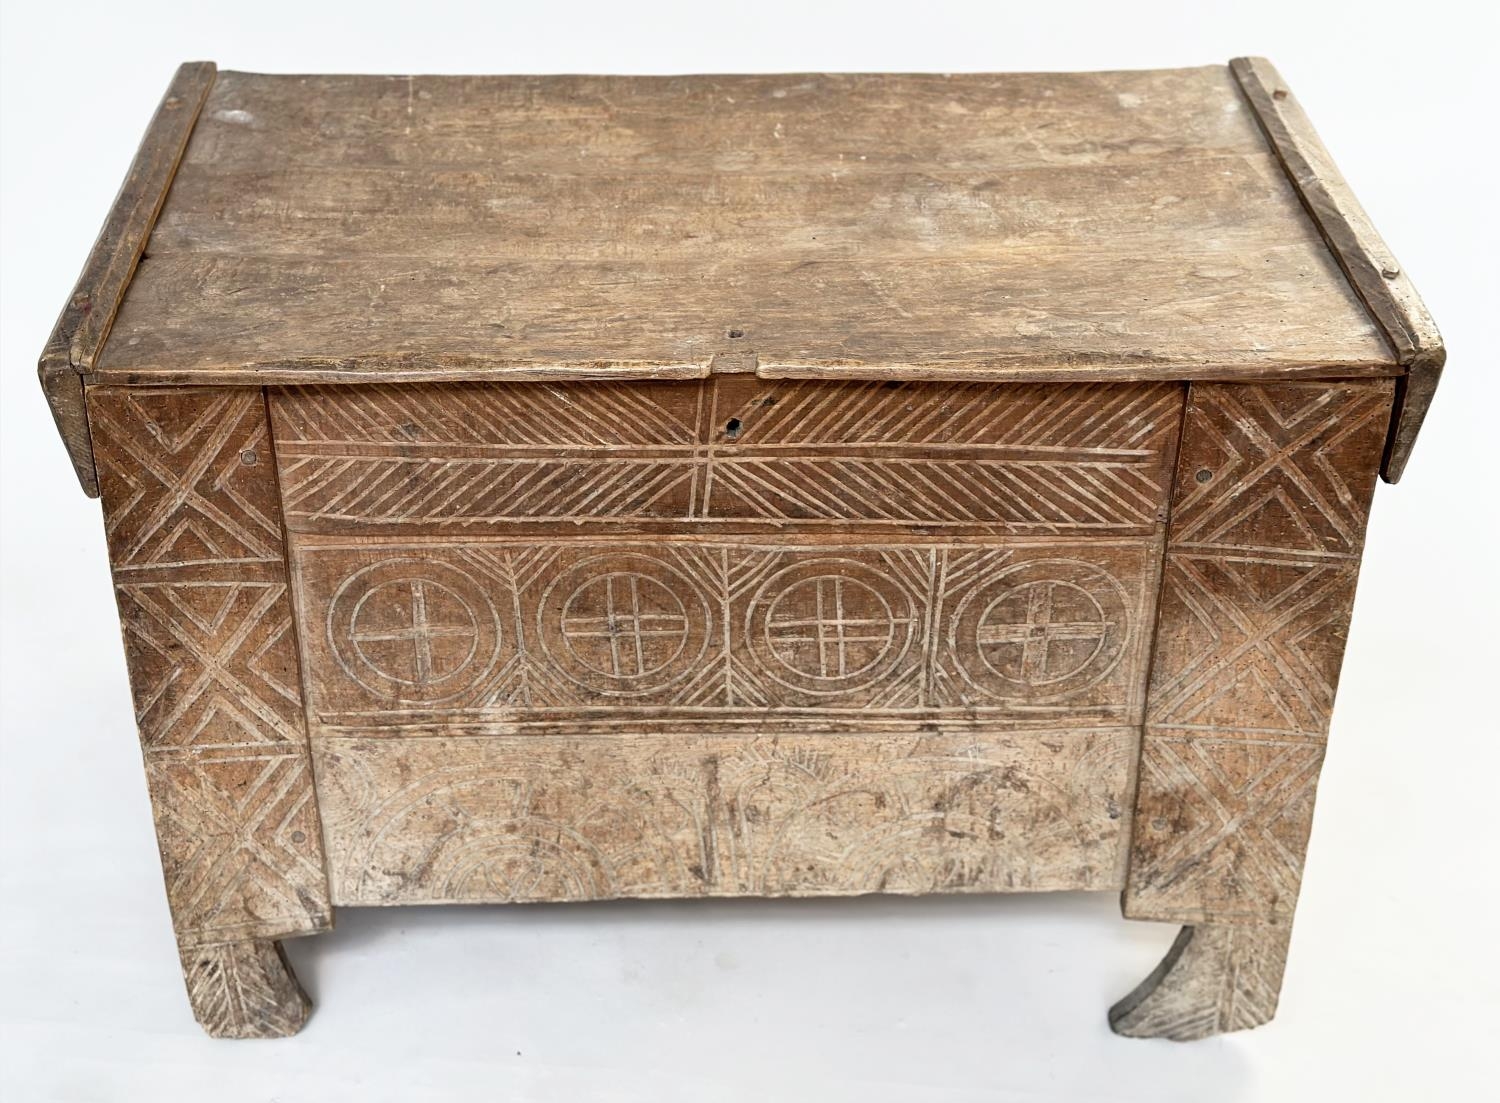 SCANDINAVIAN KISTA TRUNK, early 18th century sycamore of pegged construction with chip decorated - Image 3 of 12